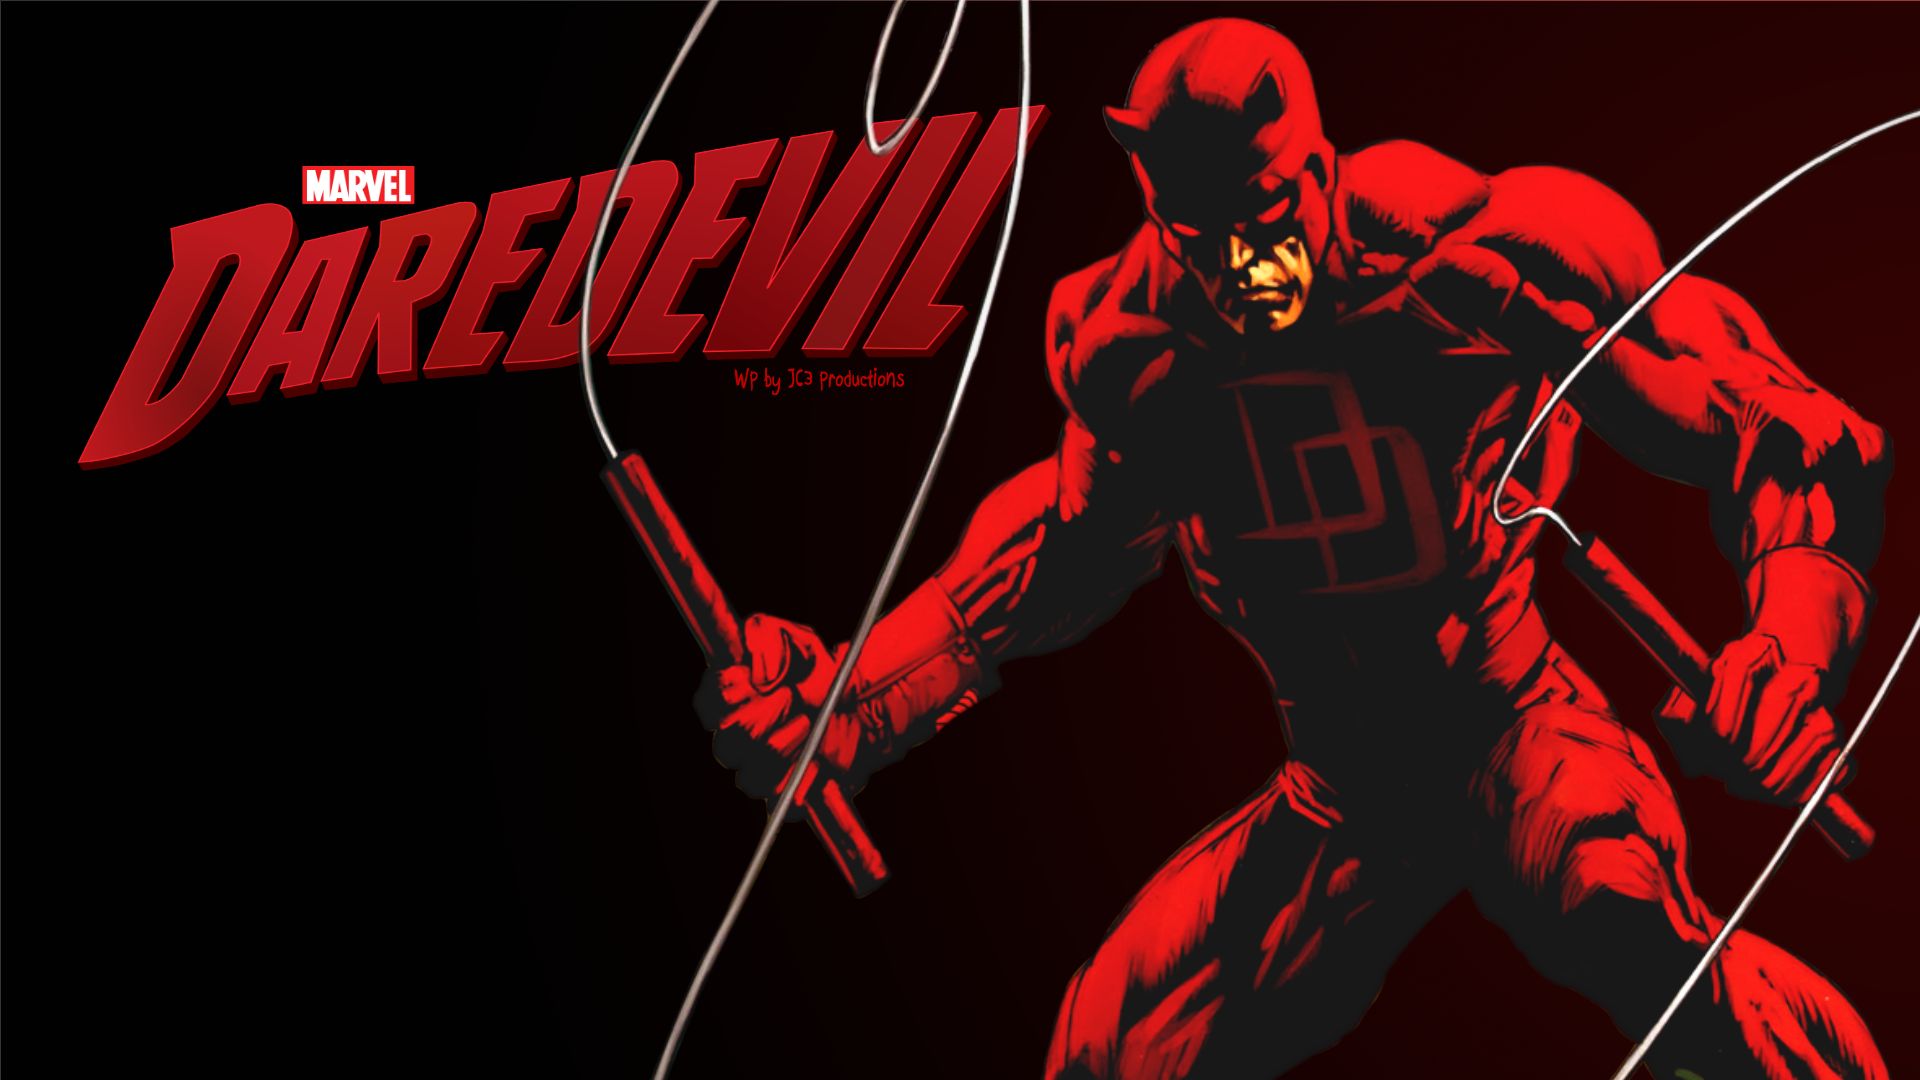 Daredevil Image 3c HD Wallpaper And Background Photos